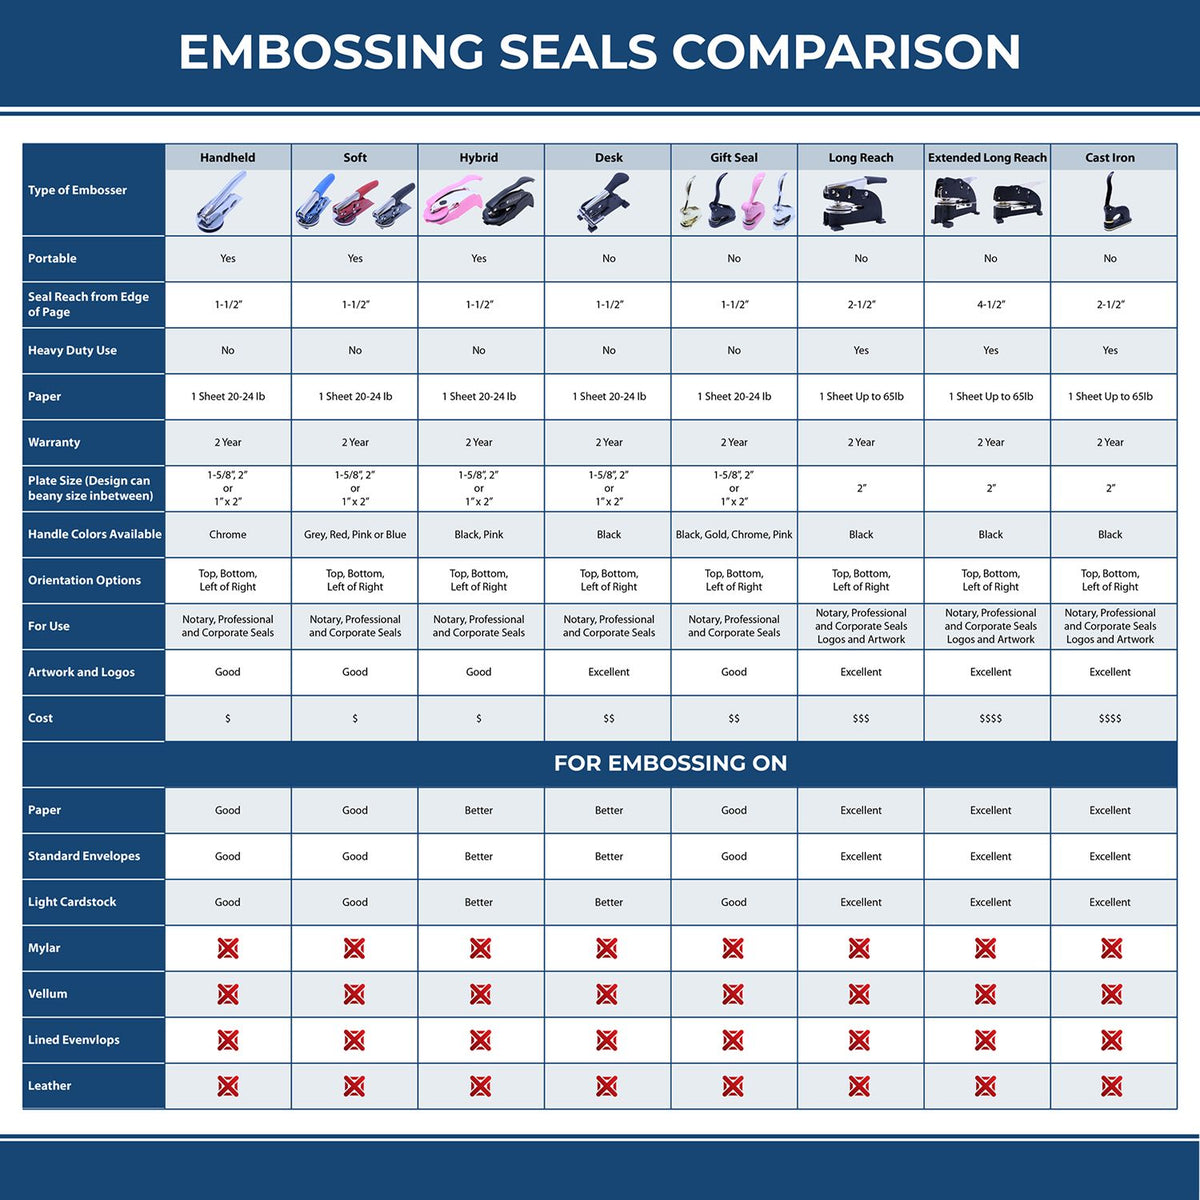 A comparison chart for the different types of mount models available for the Soft Maine Professional Engineer Seal.